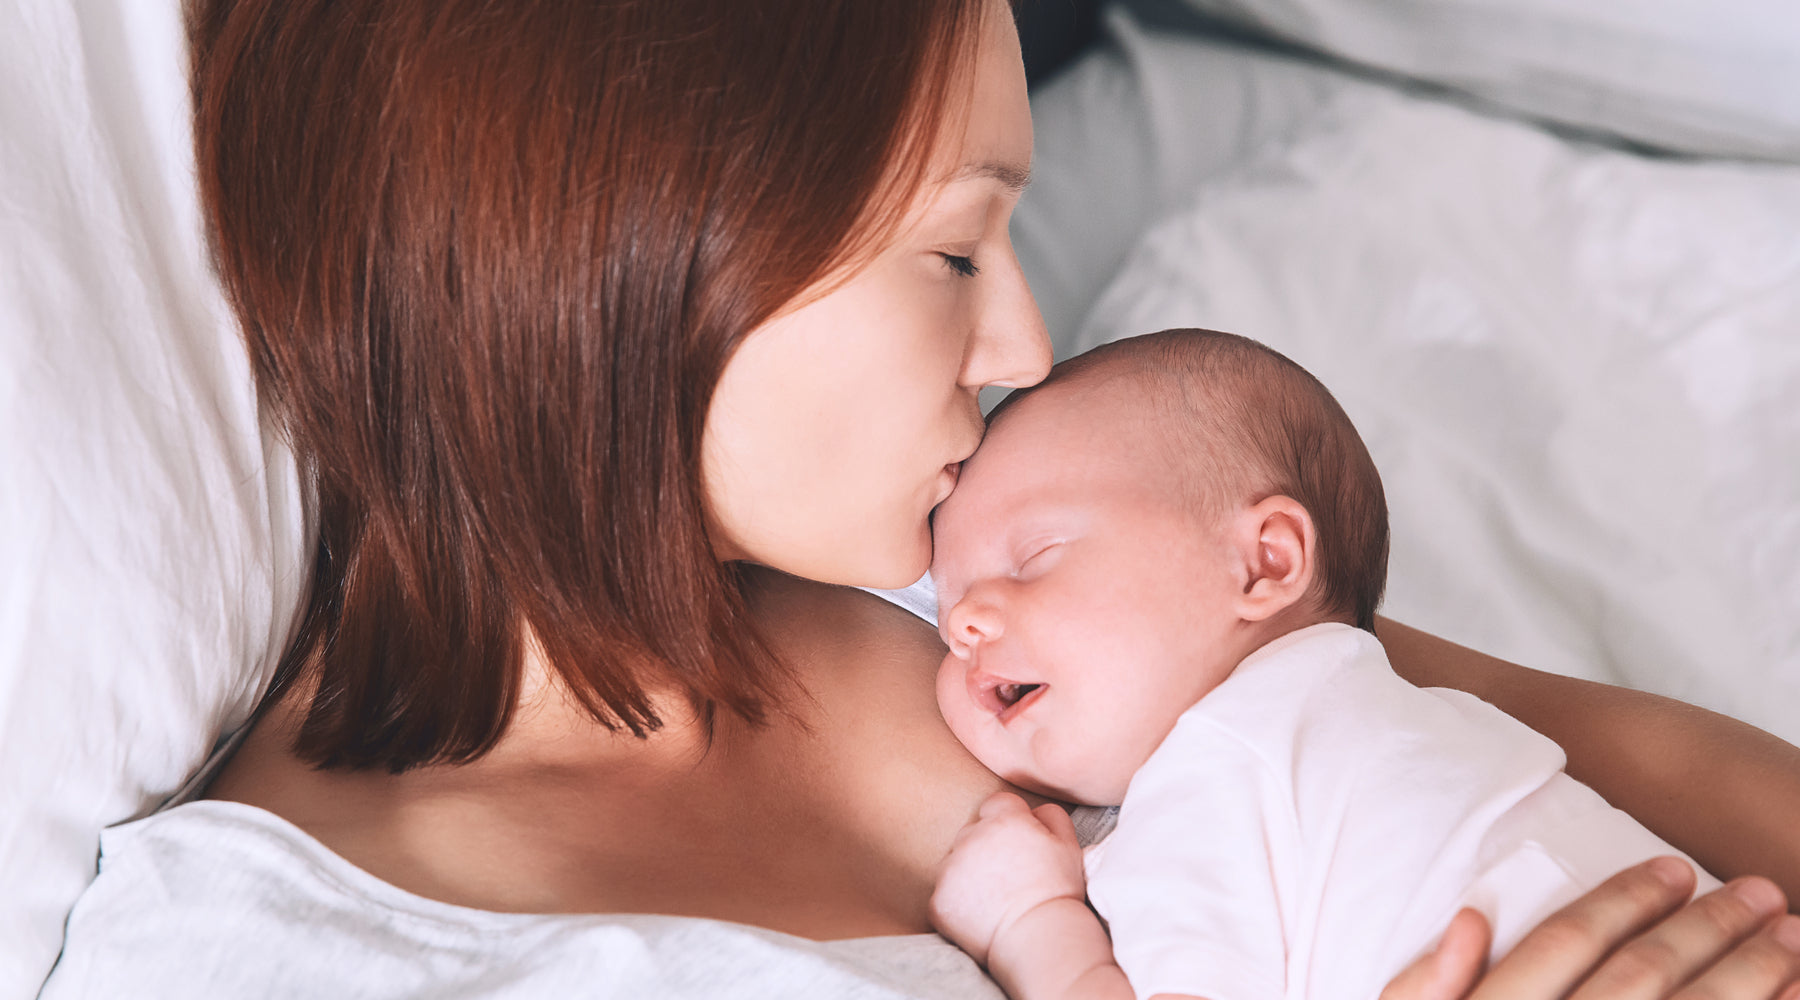 Breastfeeding Safe Skincare: Important Product Switches to Make